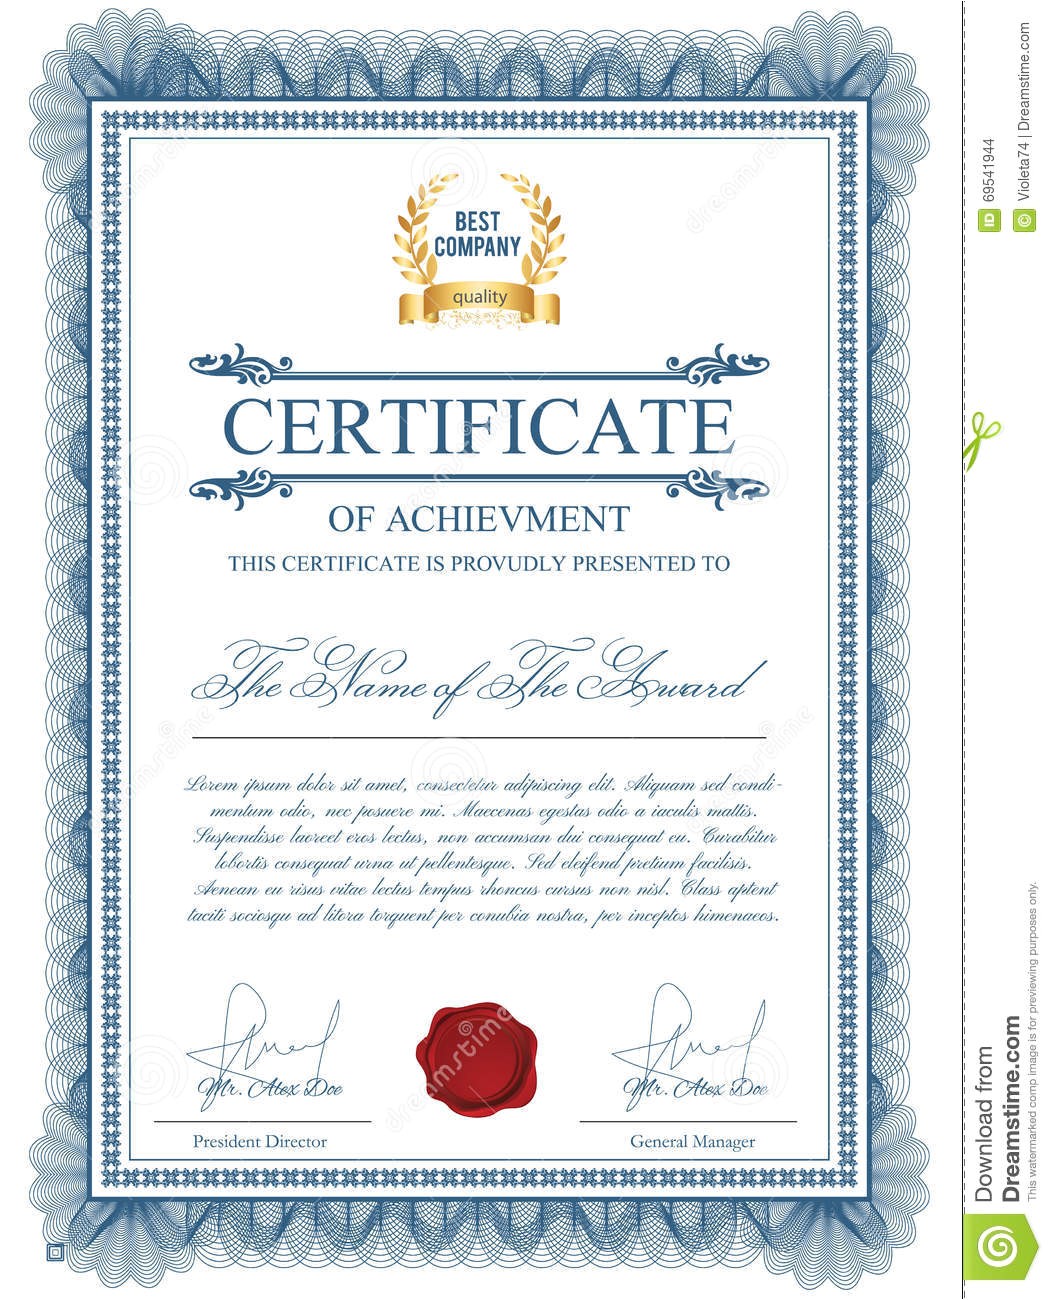 stock illustration certificate template guilloche elements blue diploma border design personal conferment vector layout award patent image69541944